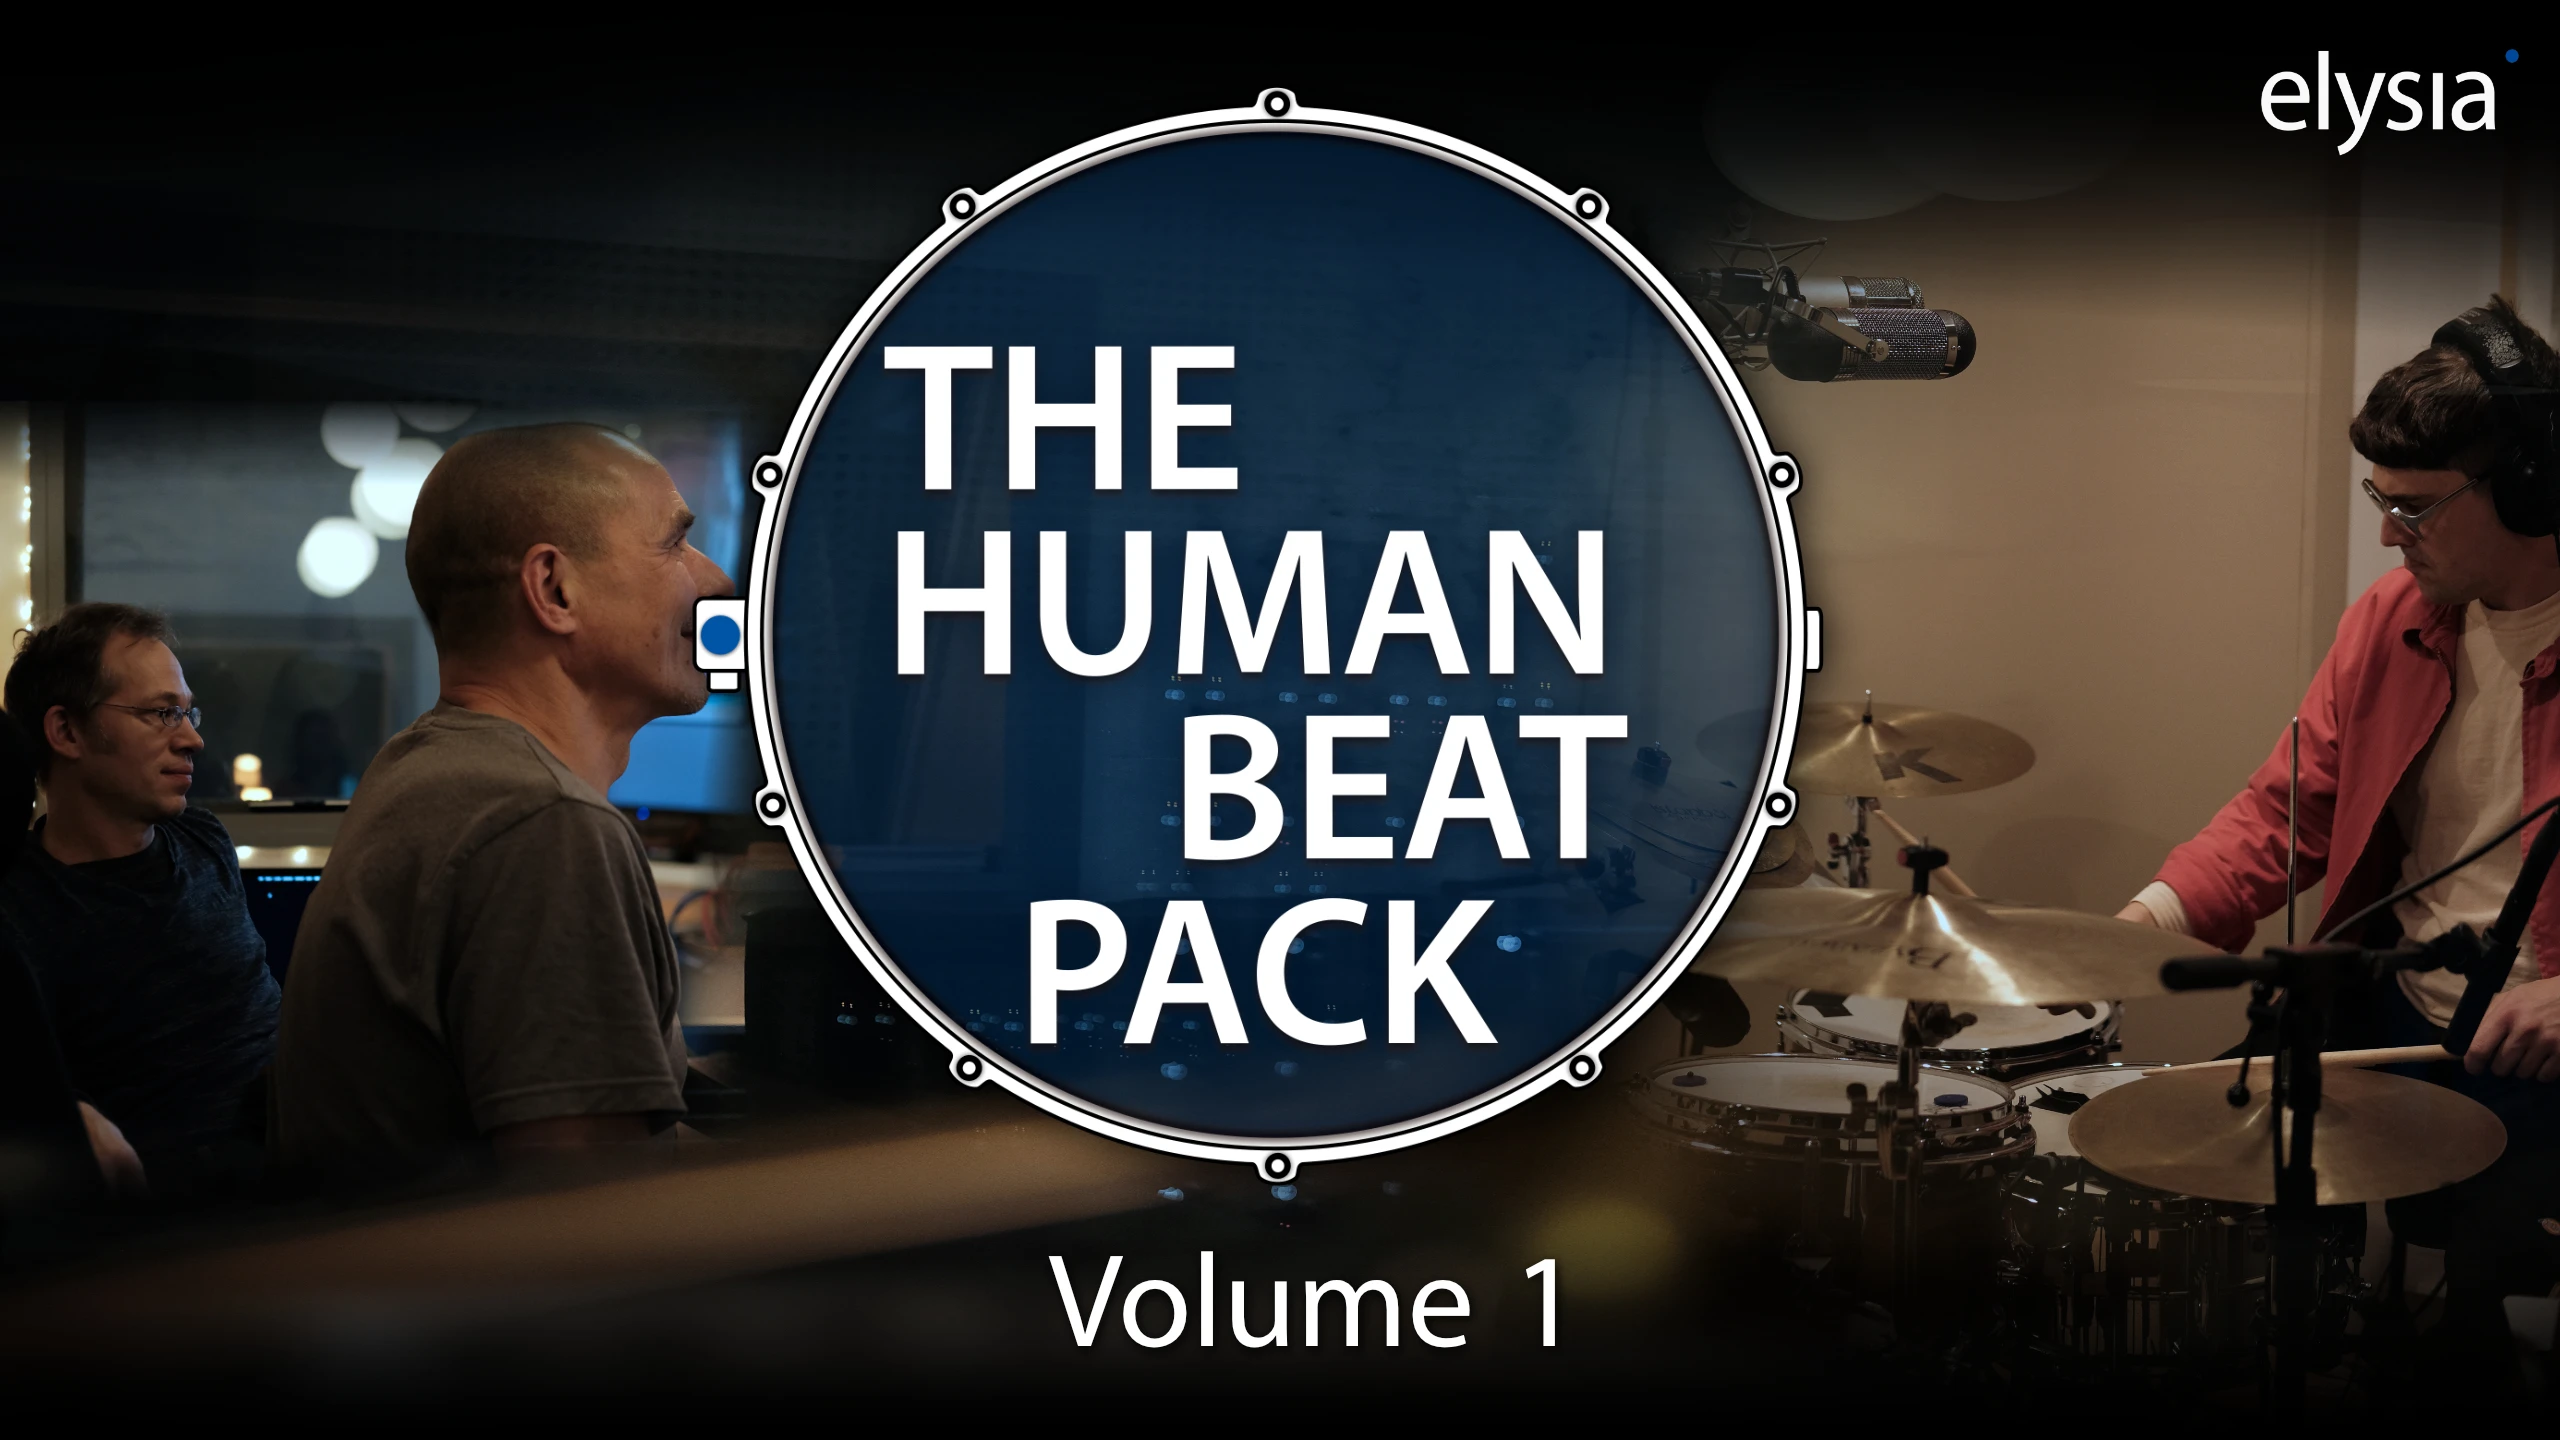 THE HUMAN BEAT PACK Volume 1